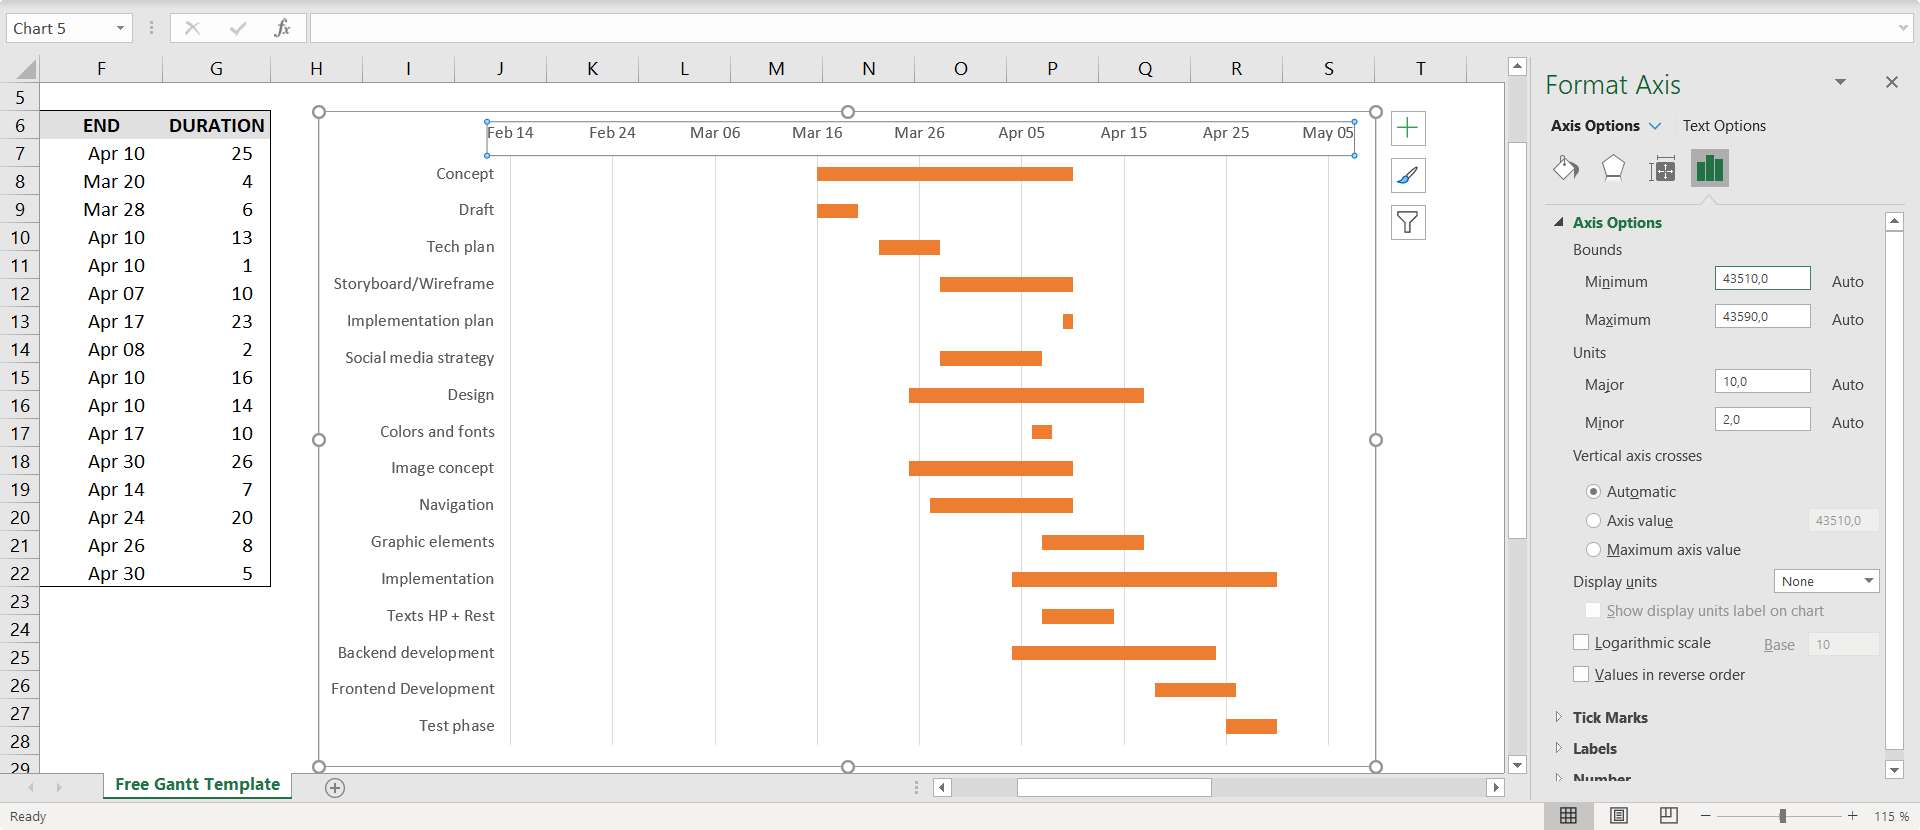 How to adjust the x-axis range in a stacked bar chart in Excel